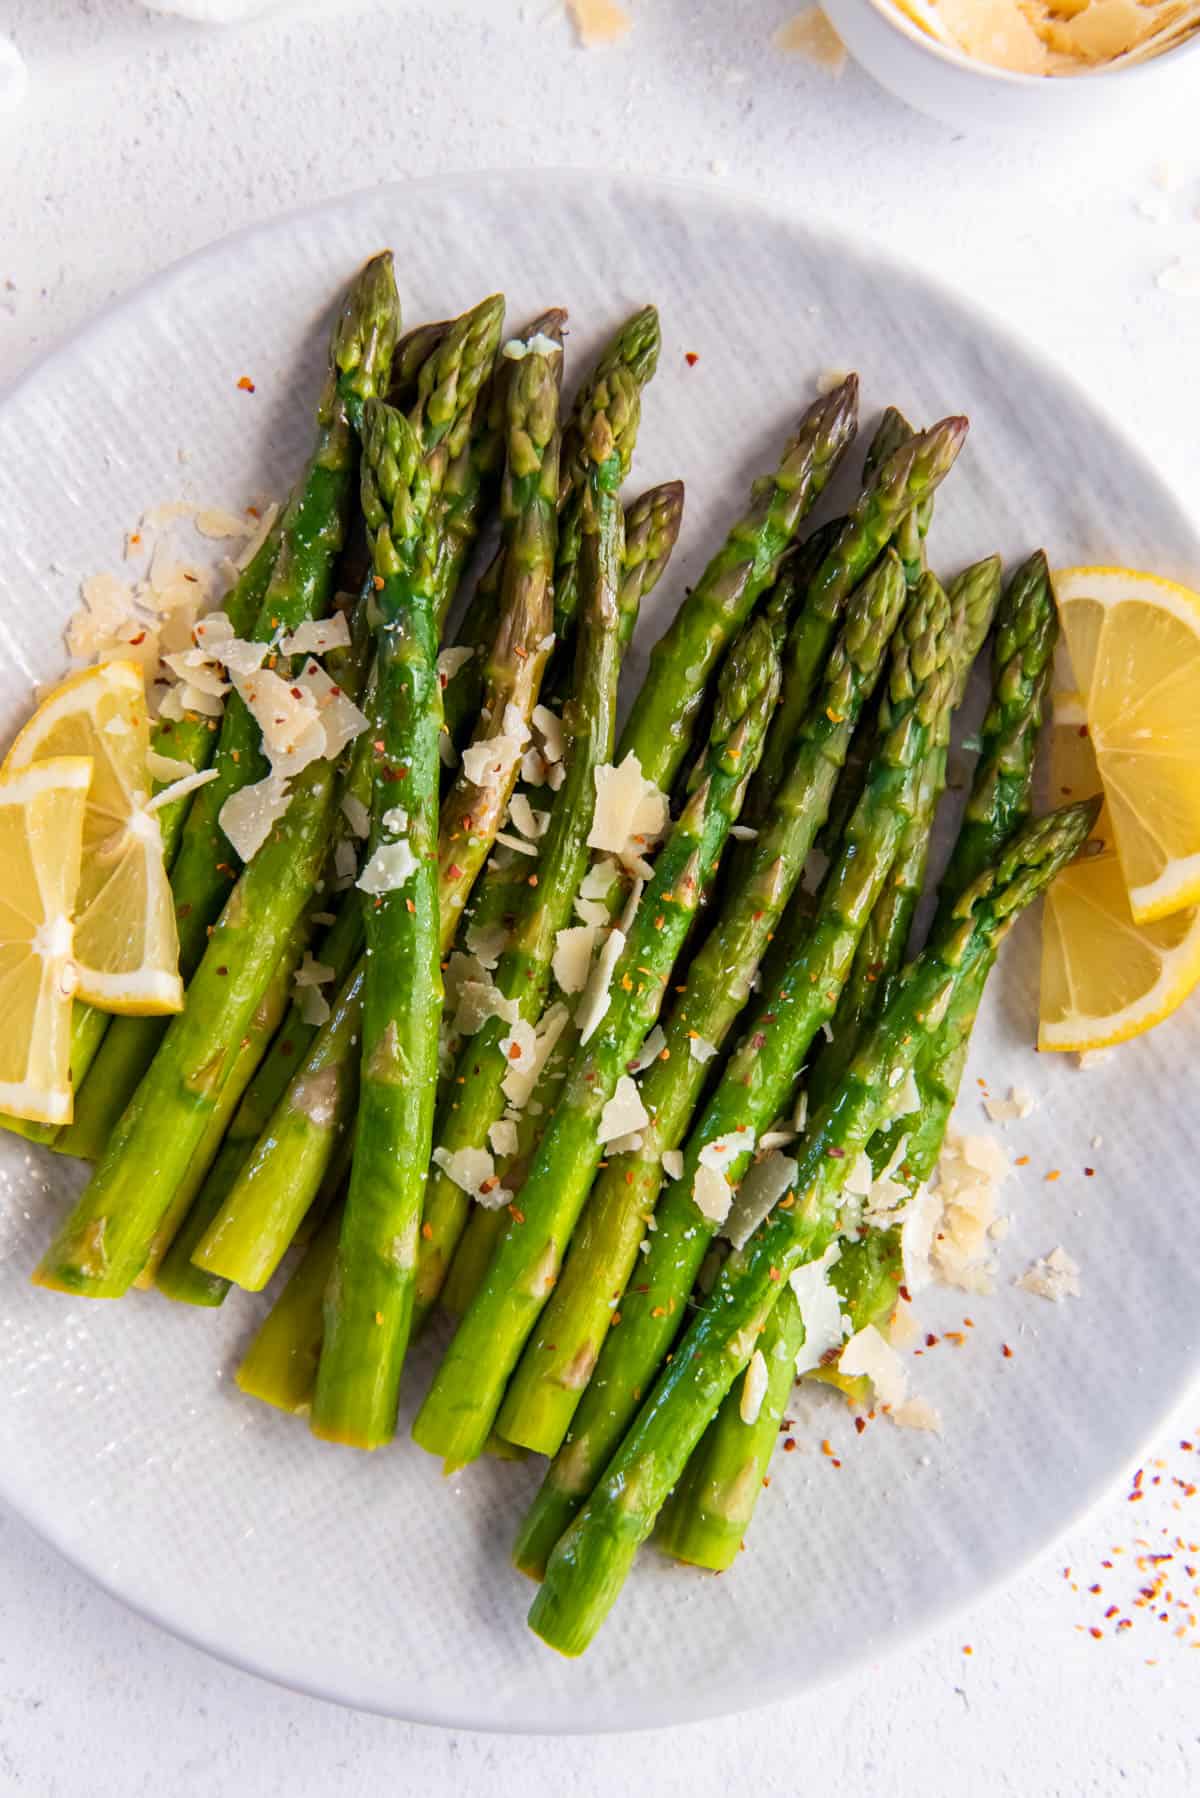 cooked asparagus on a plate with lemon slices